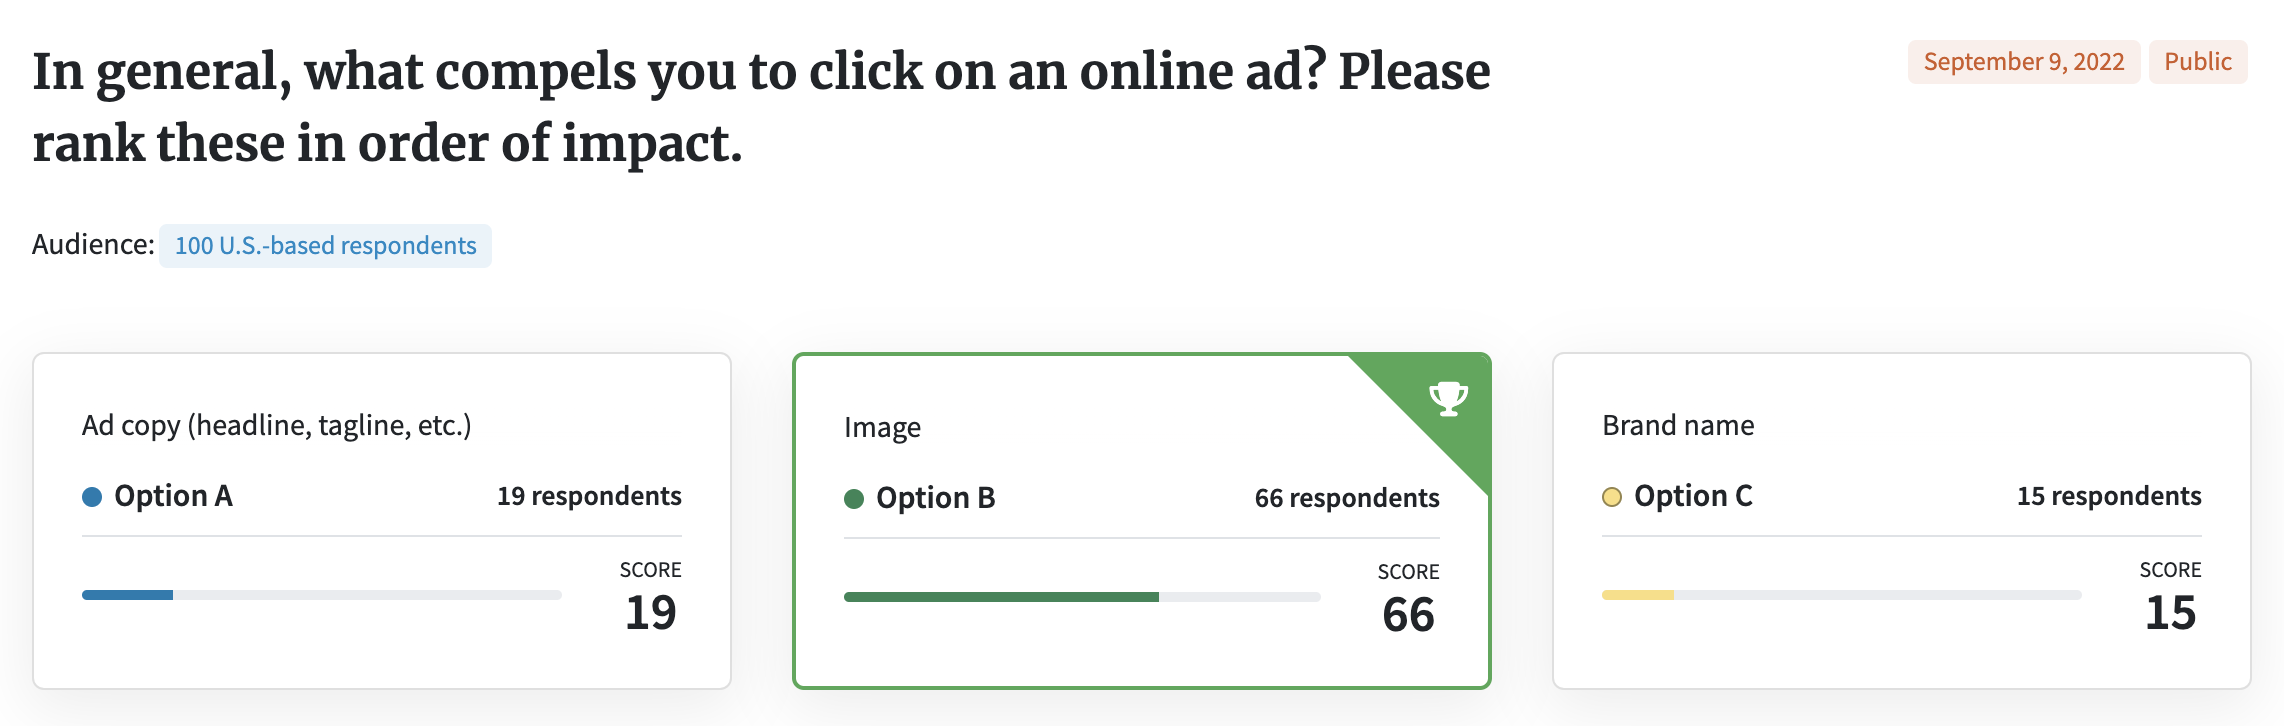 screenshot of PickFu poll about the importance of image, copy, and brand name in online ads